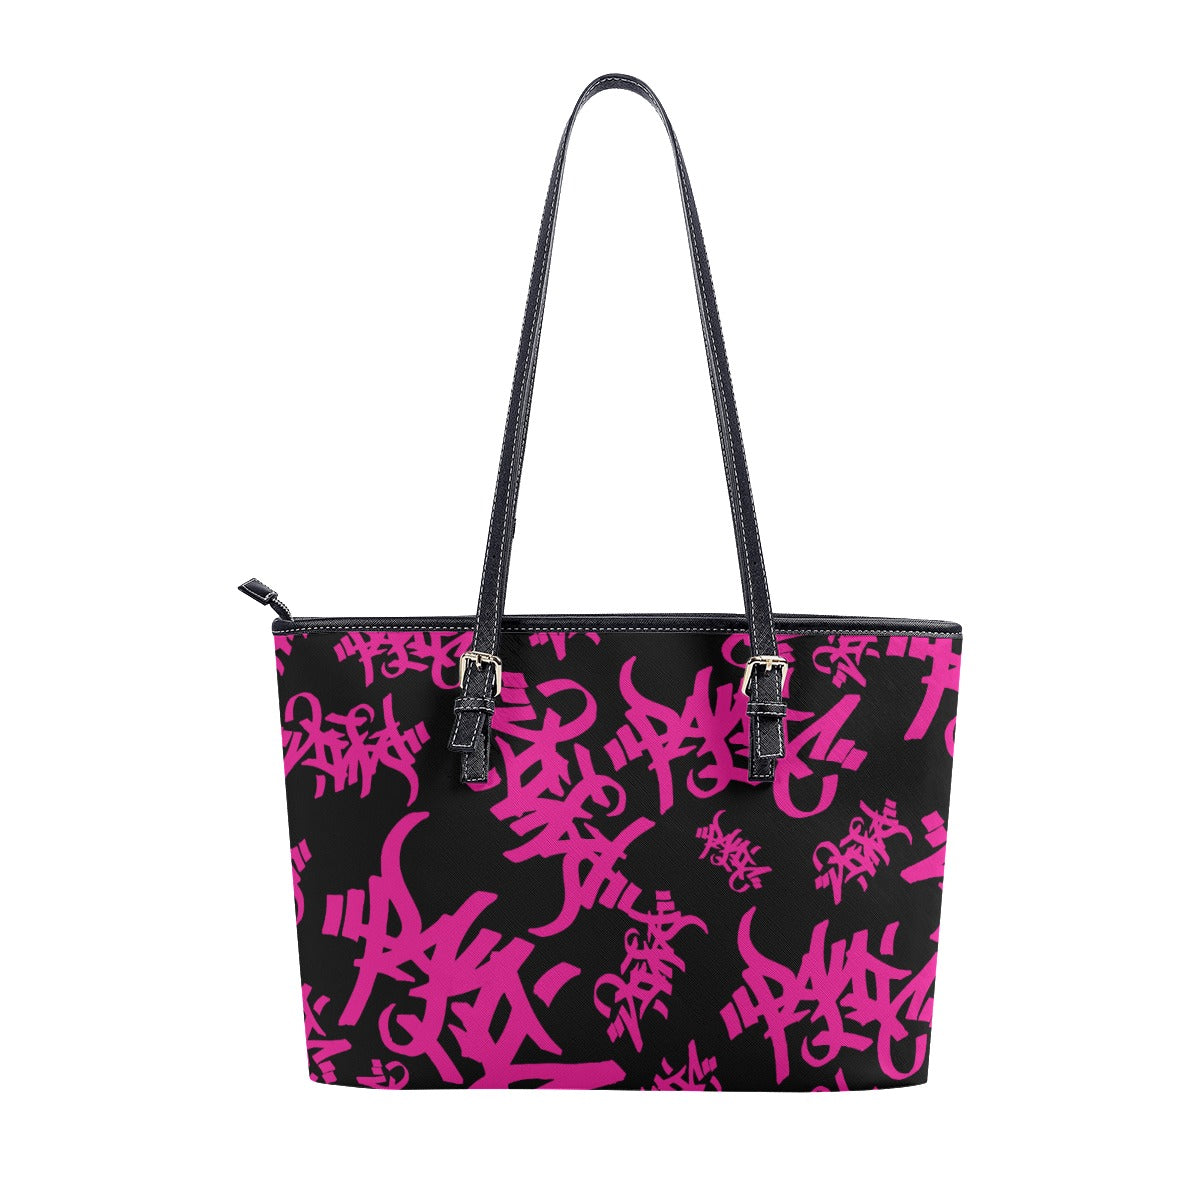 THE TAG FAUX LEATHER TOTE BAG - BLACK/HOT PINK – Panic 39